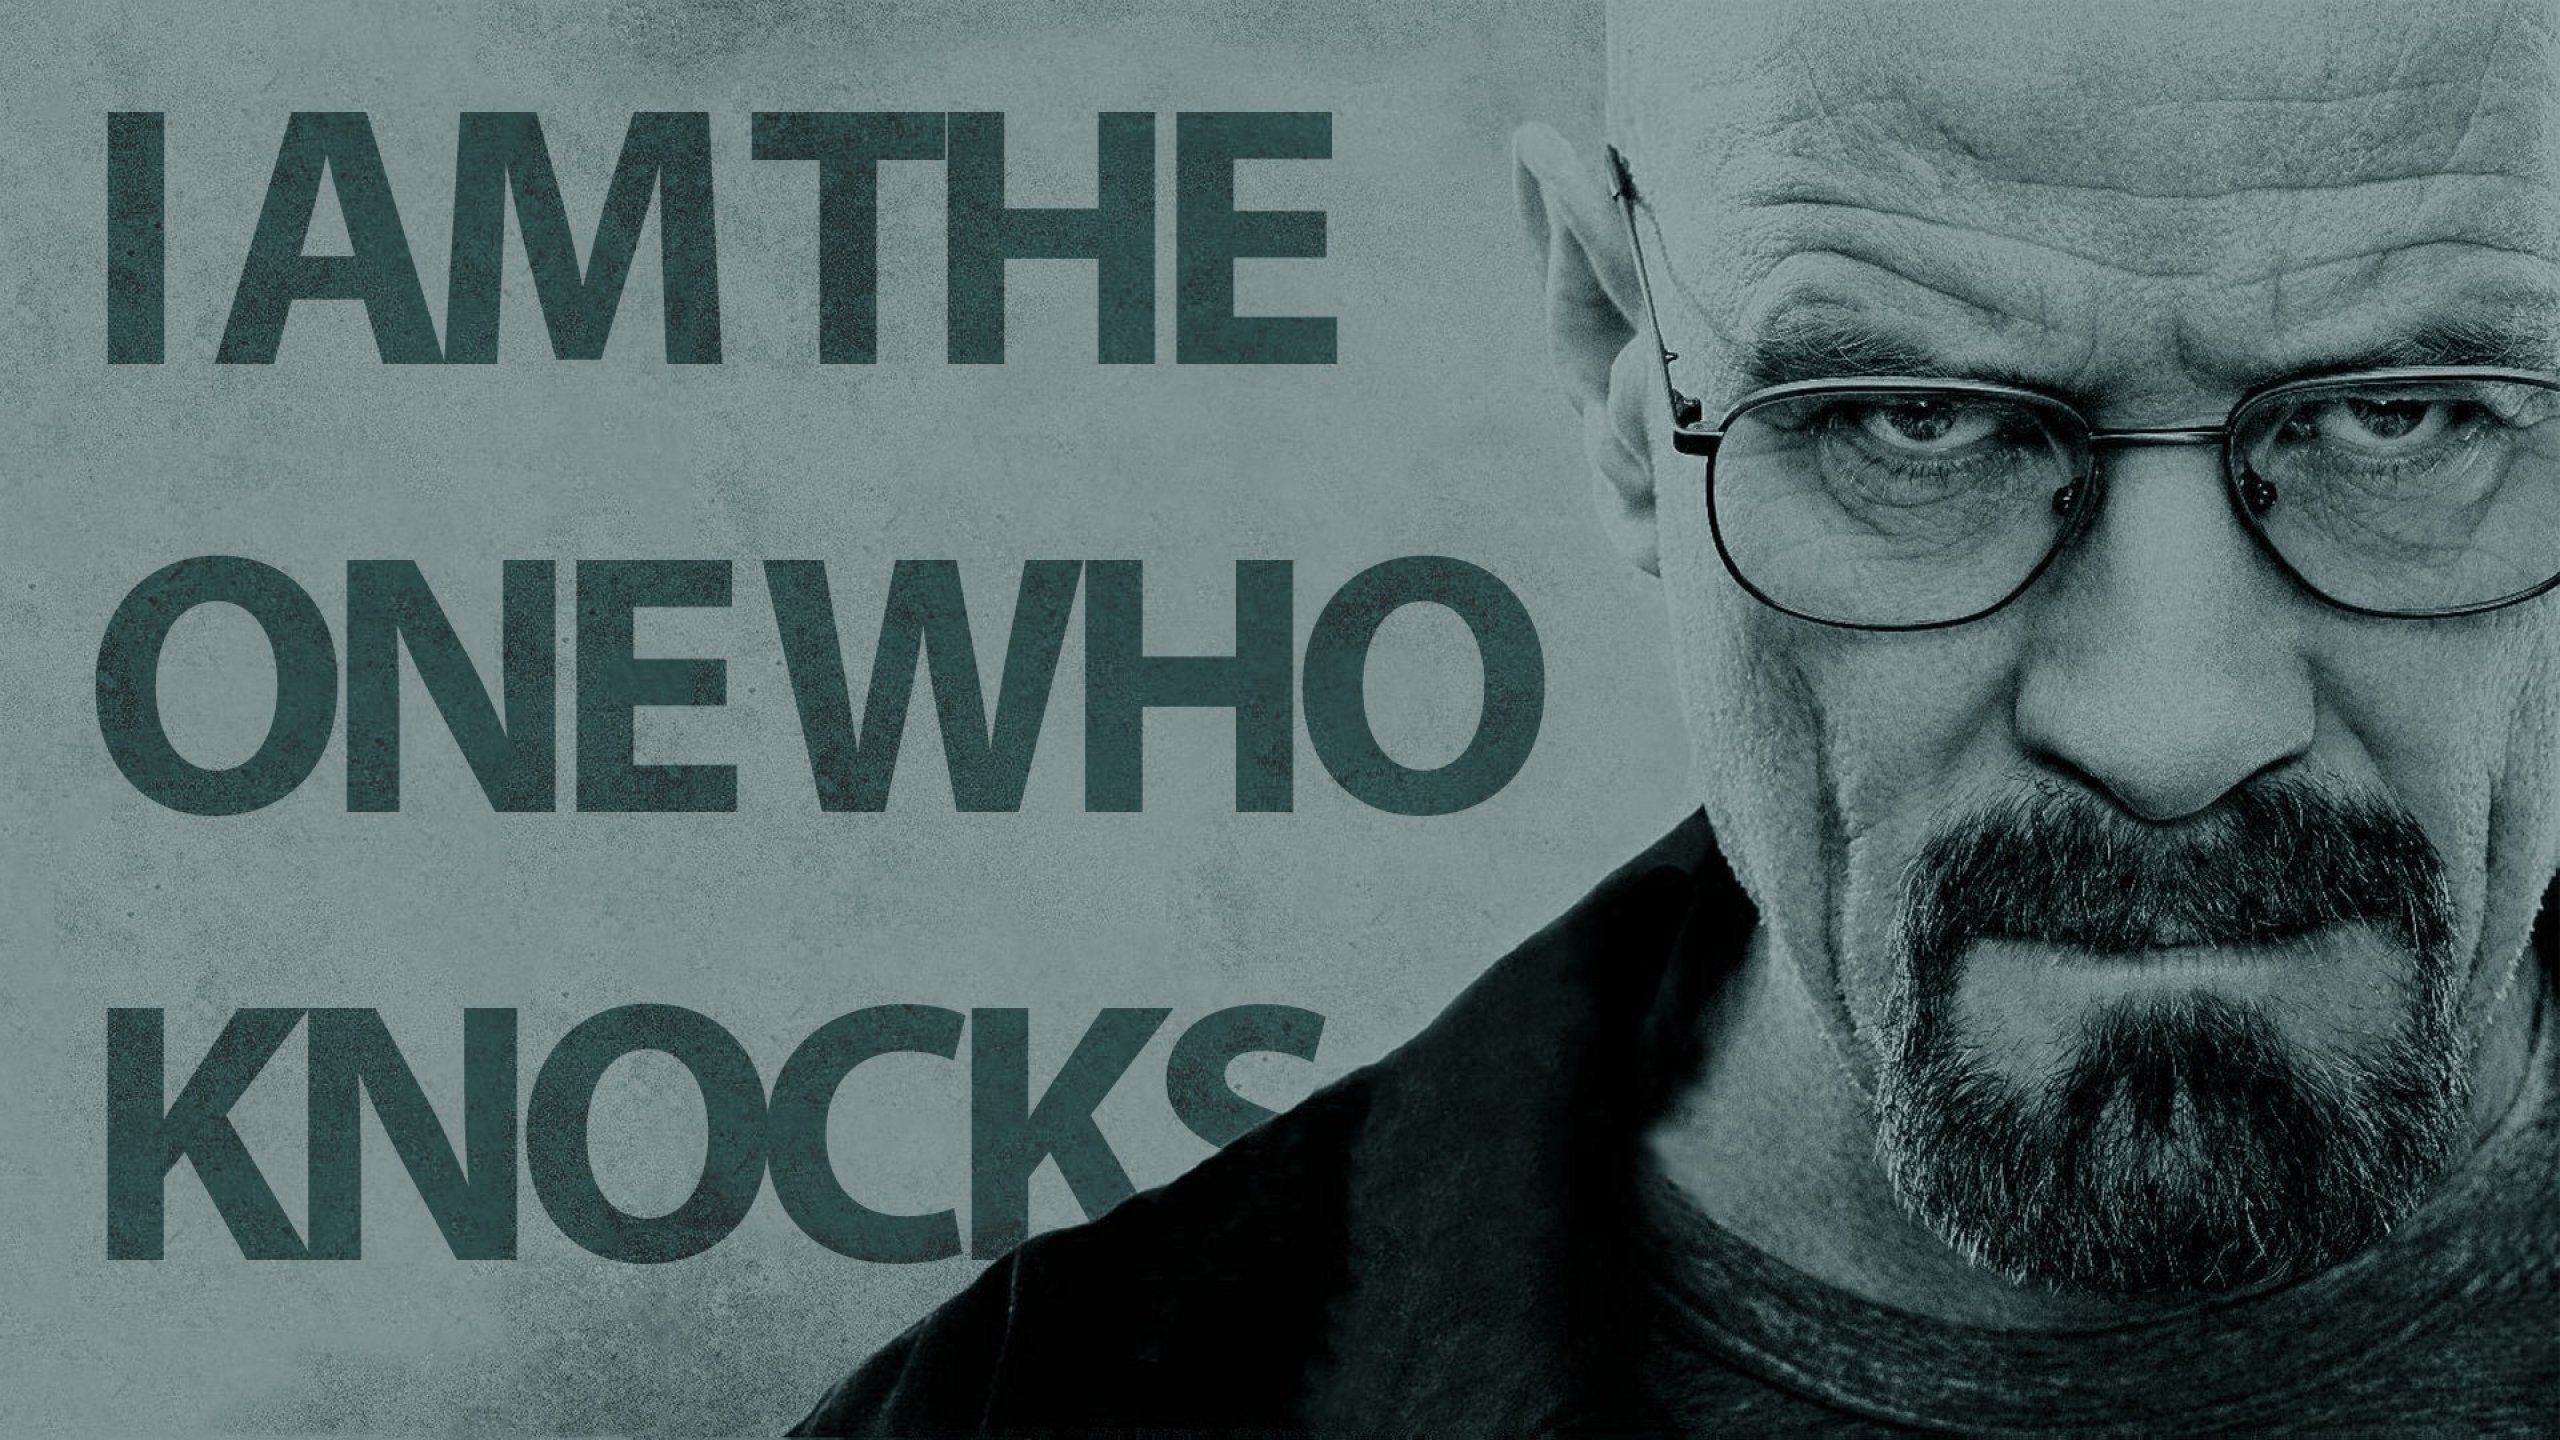 Wallpapers wallpaper walter white boys movies on the desktop